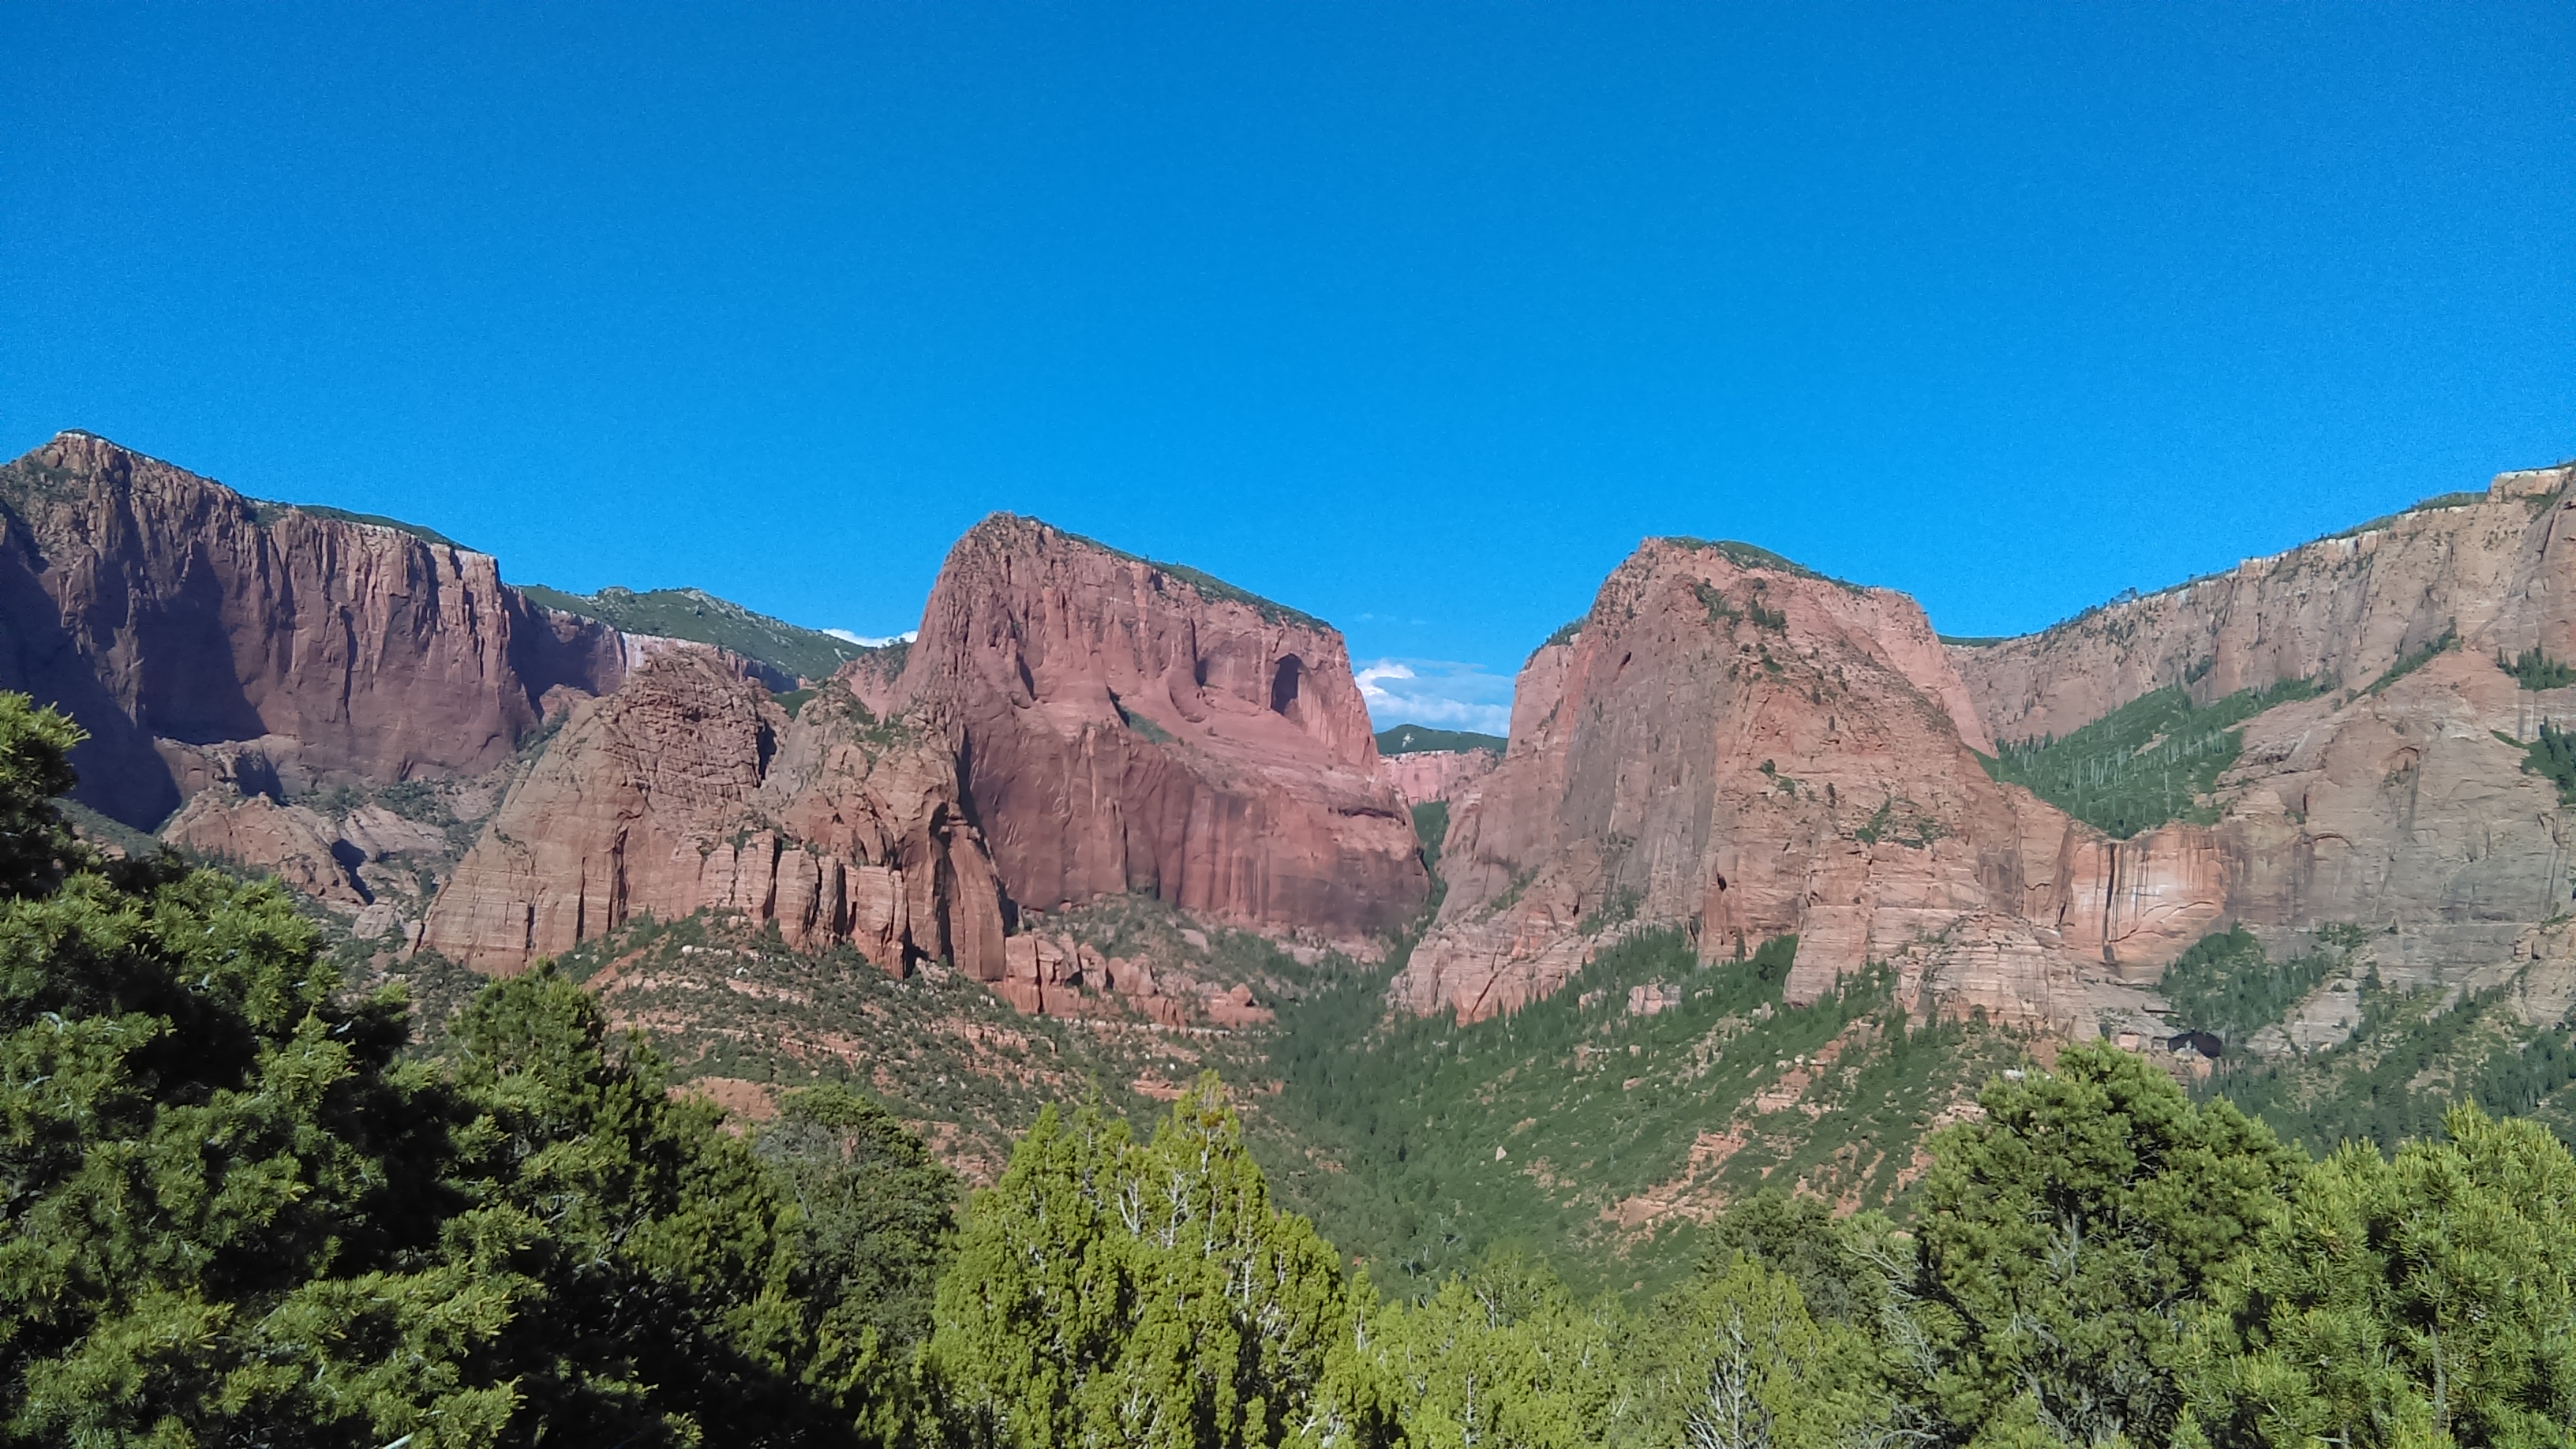 Kolob Canyon. There are many hikes to do here, but one of particular interest in Taylor Creek Trail. (Emily Sorensen)